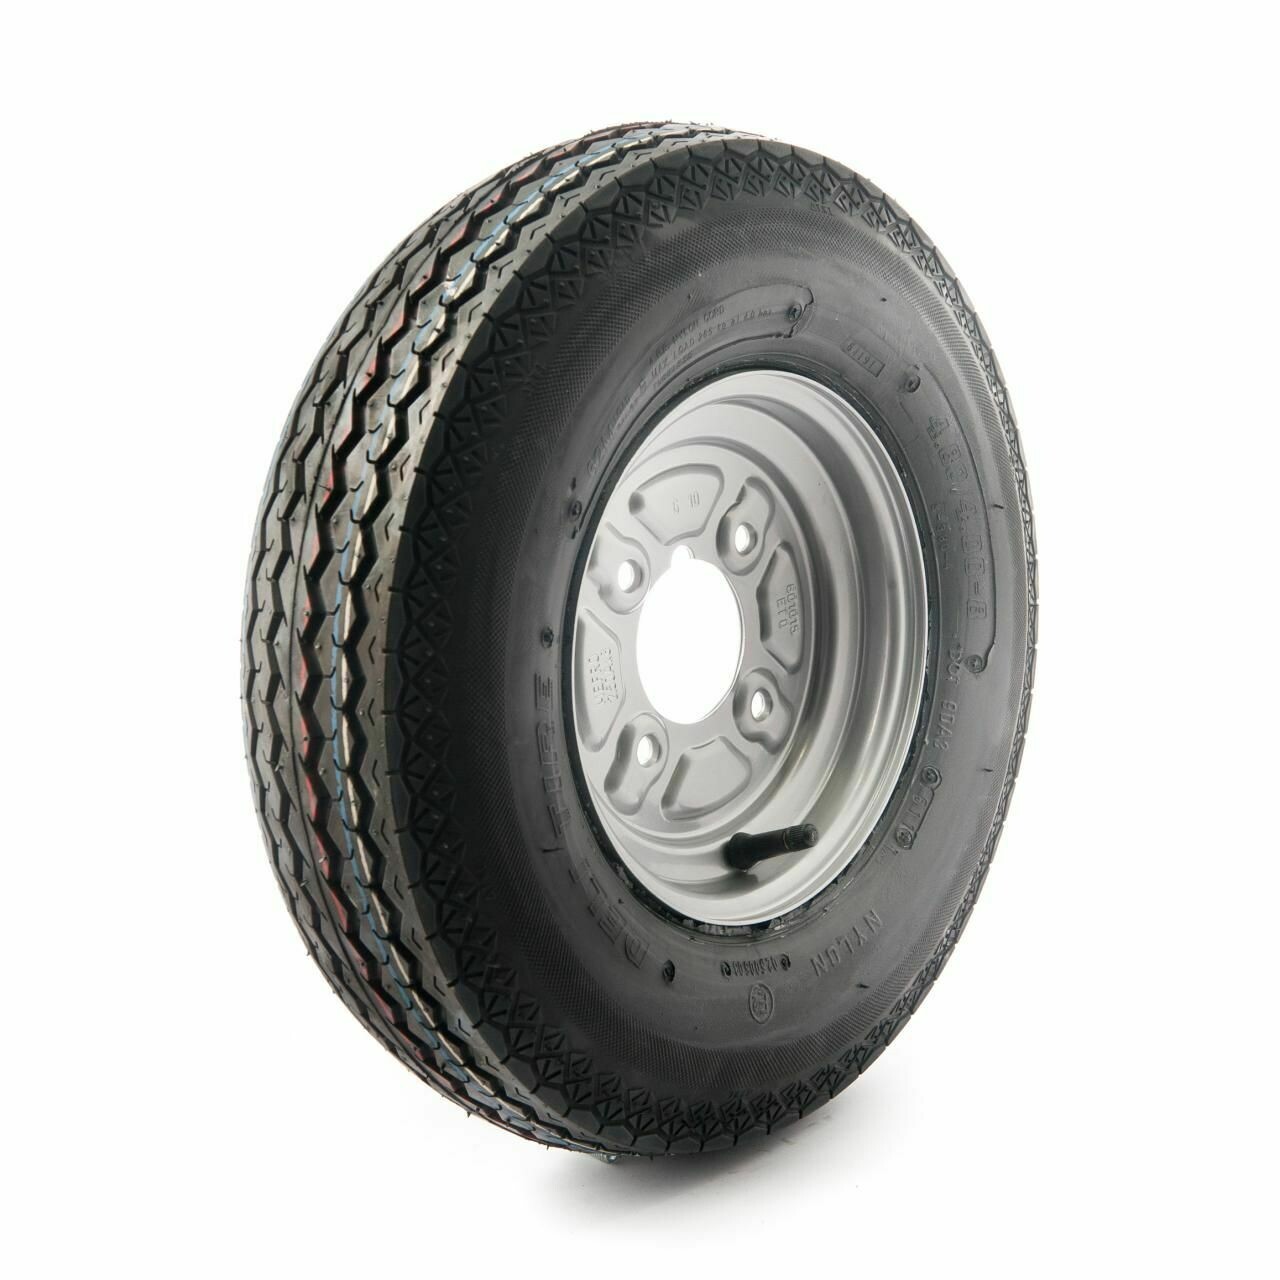 400 x 8 4ply (4 x 4 inch pcd) trailer wheel and tyre